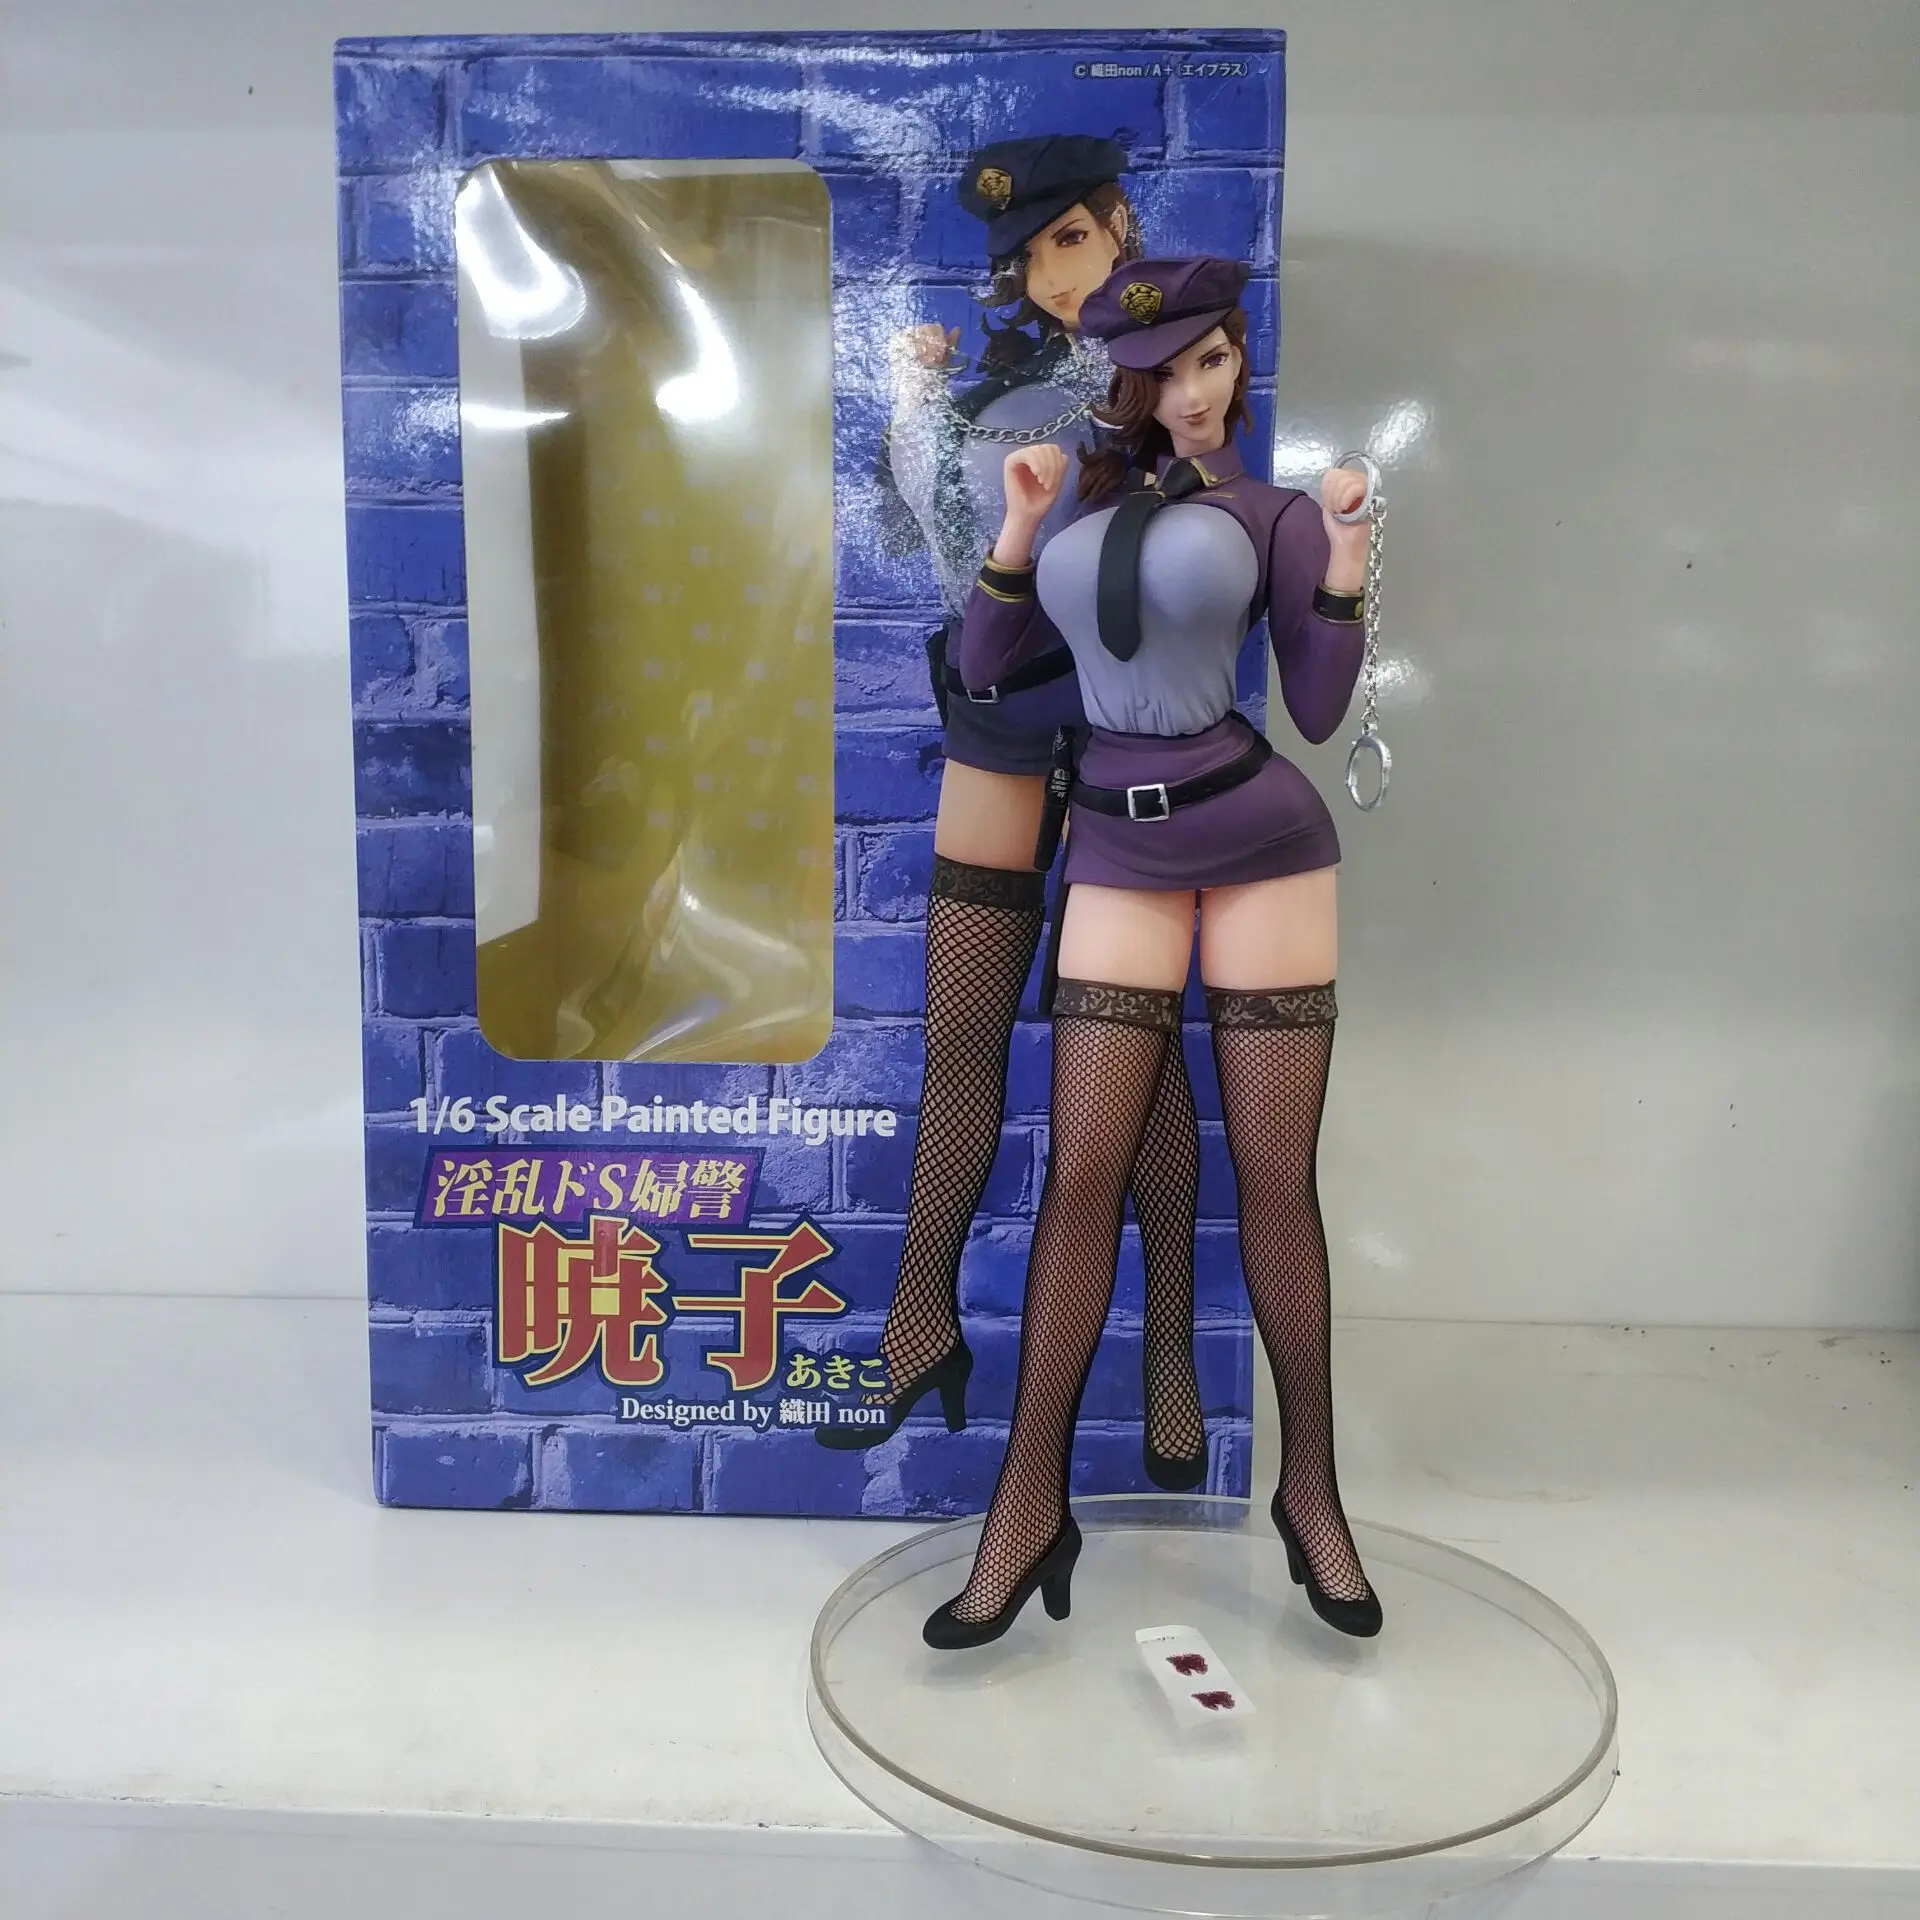 

Sexy Japan Anime Nasty S Police Woman Action Figure Akiko Designed By Oda Non 1/6 Scale Painted Model Collection Toy 27cm